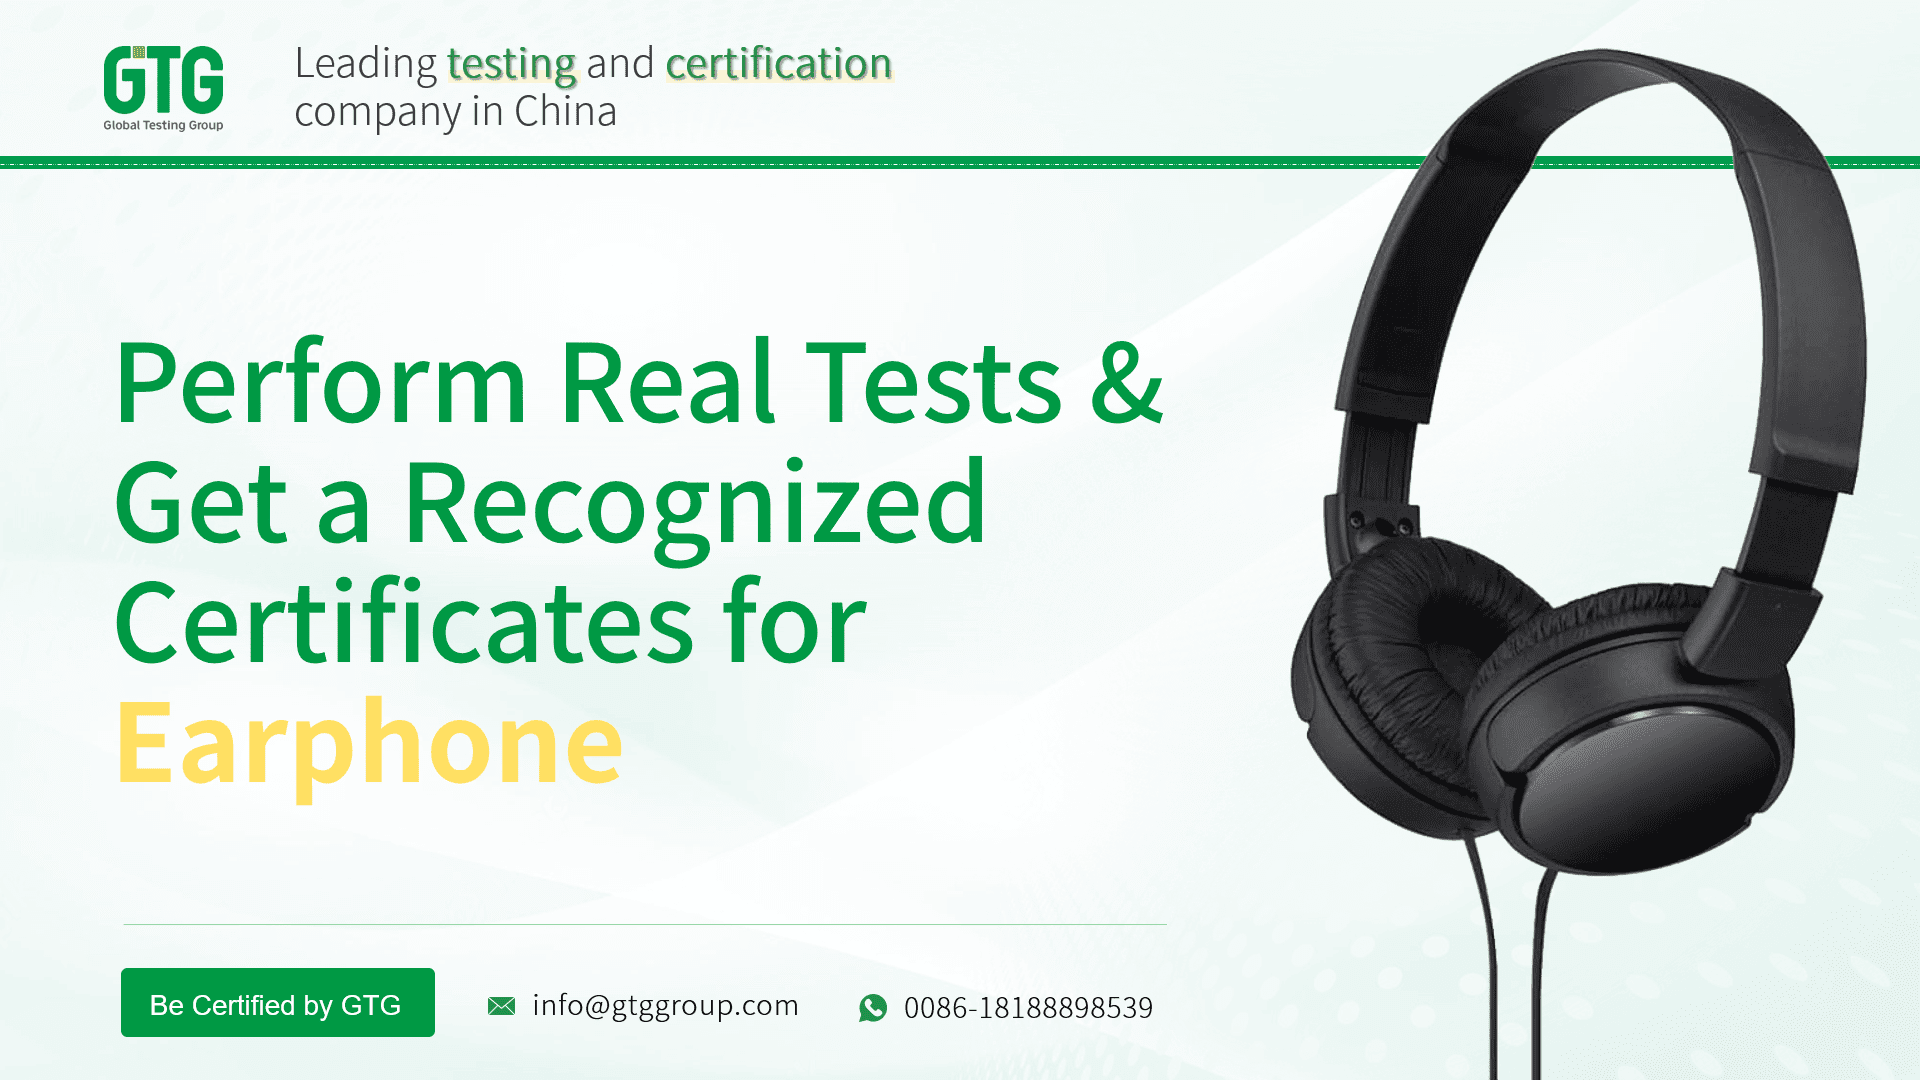 Get Test Report and Certifications for Earphone from GTG Group